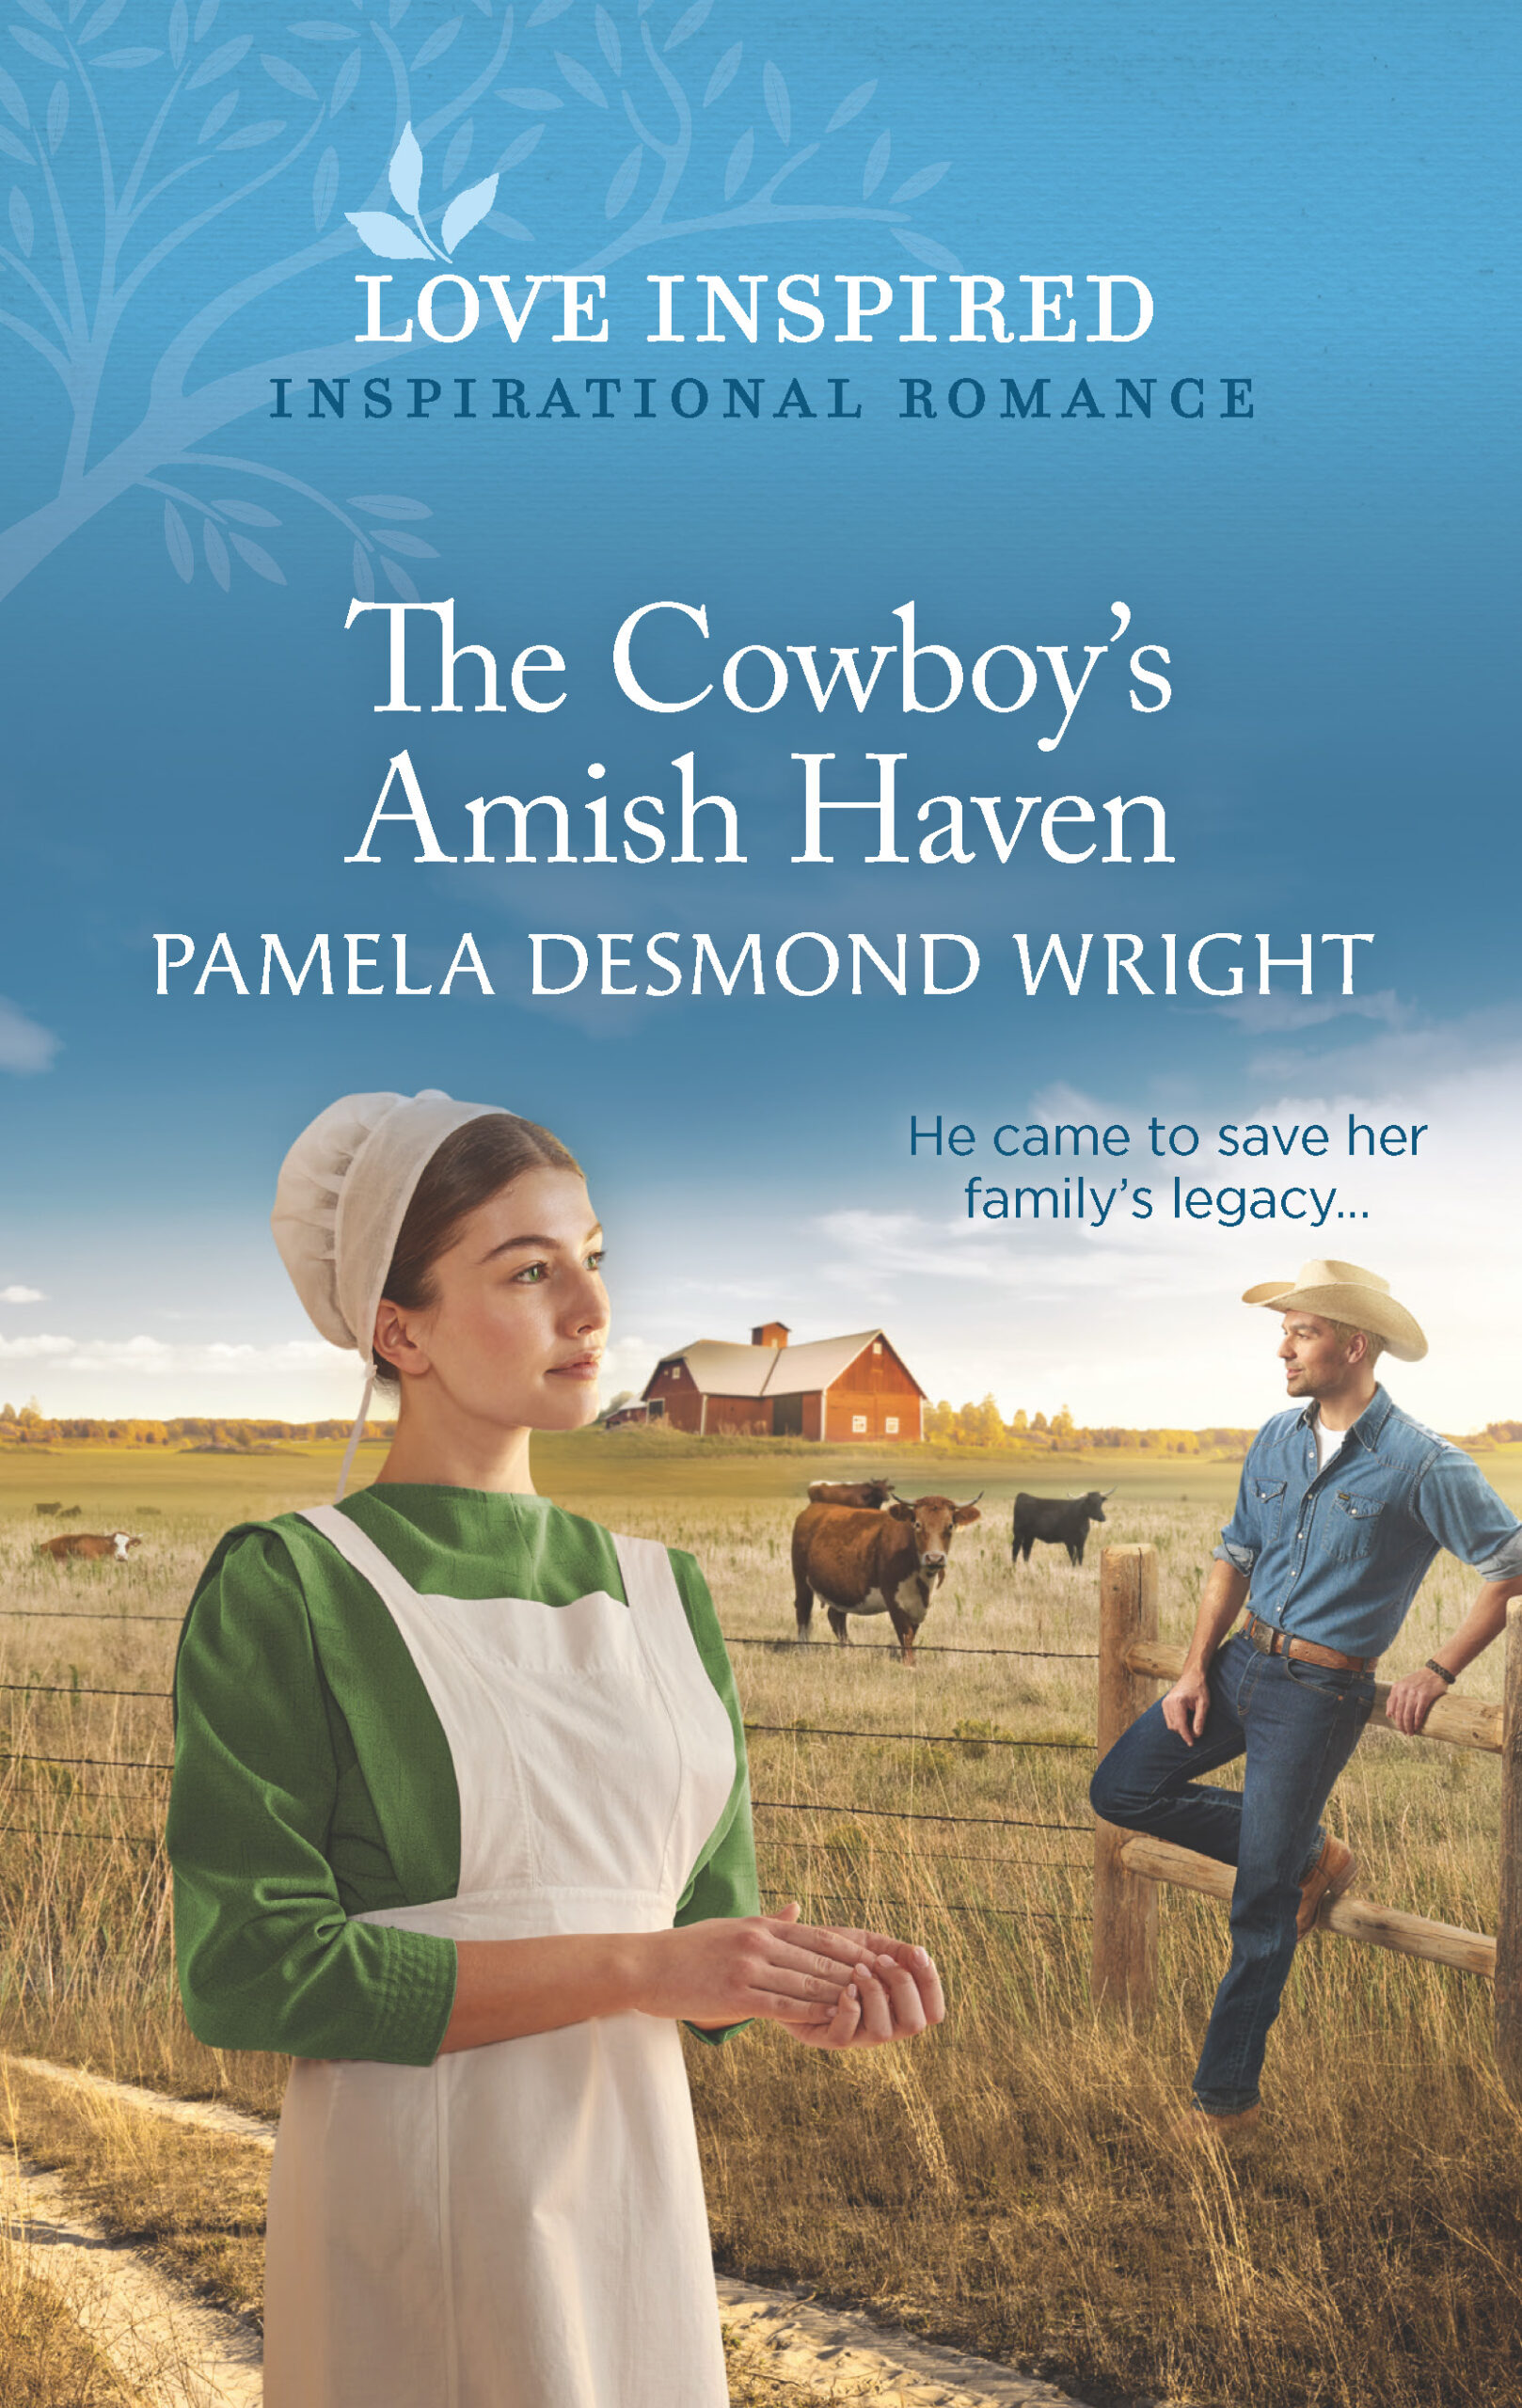 The Cowboy’s Amish Haven